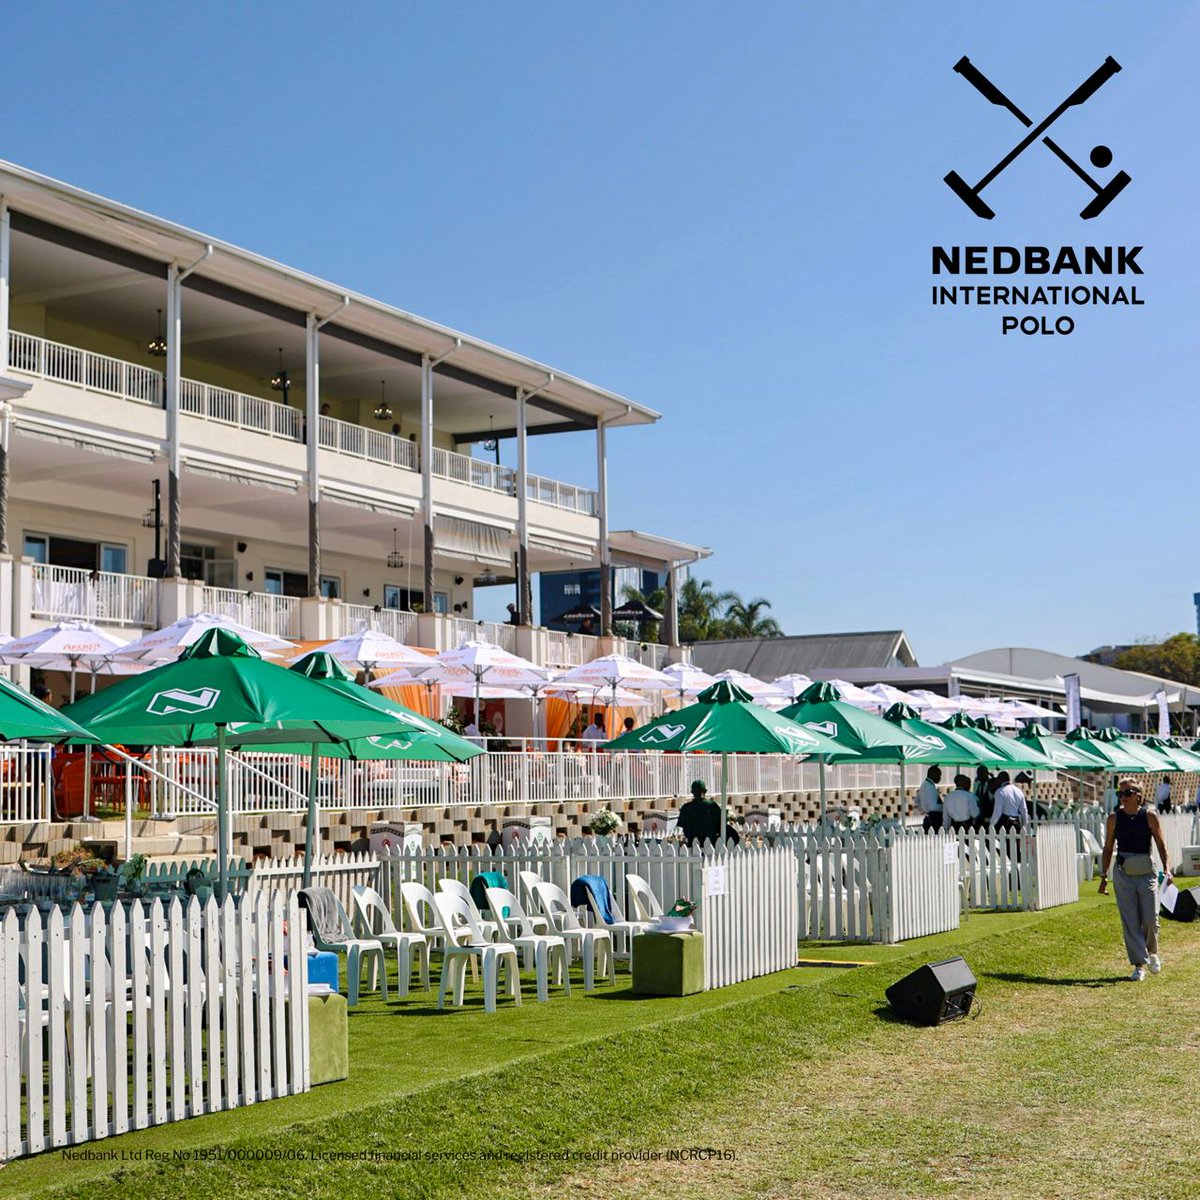 We are back for another #NedbankPolo! Where is this year’s event taking place?  RT and comment with your answer using #NedbankPolo, and you could win 1 of 5 Avo vouchers worth R500!  T&Cs apply.